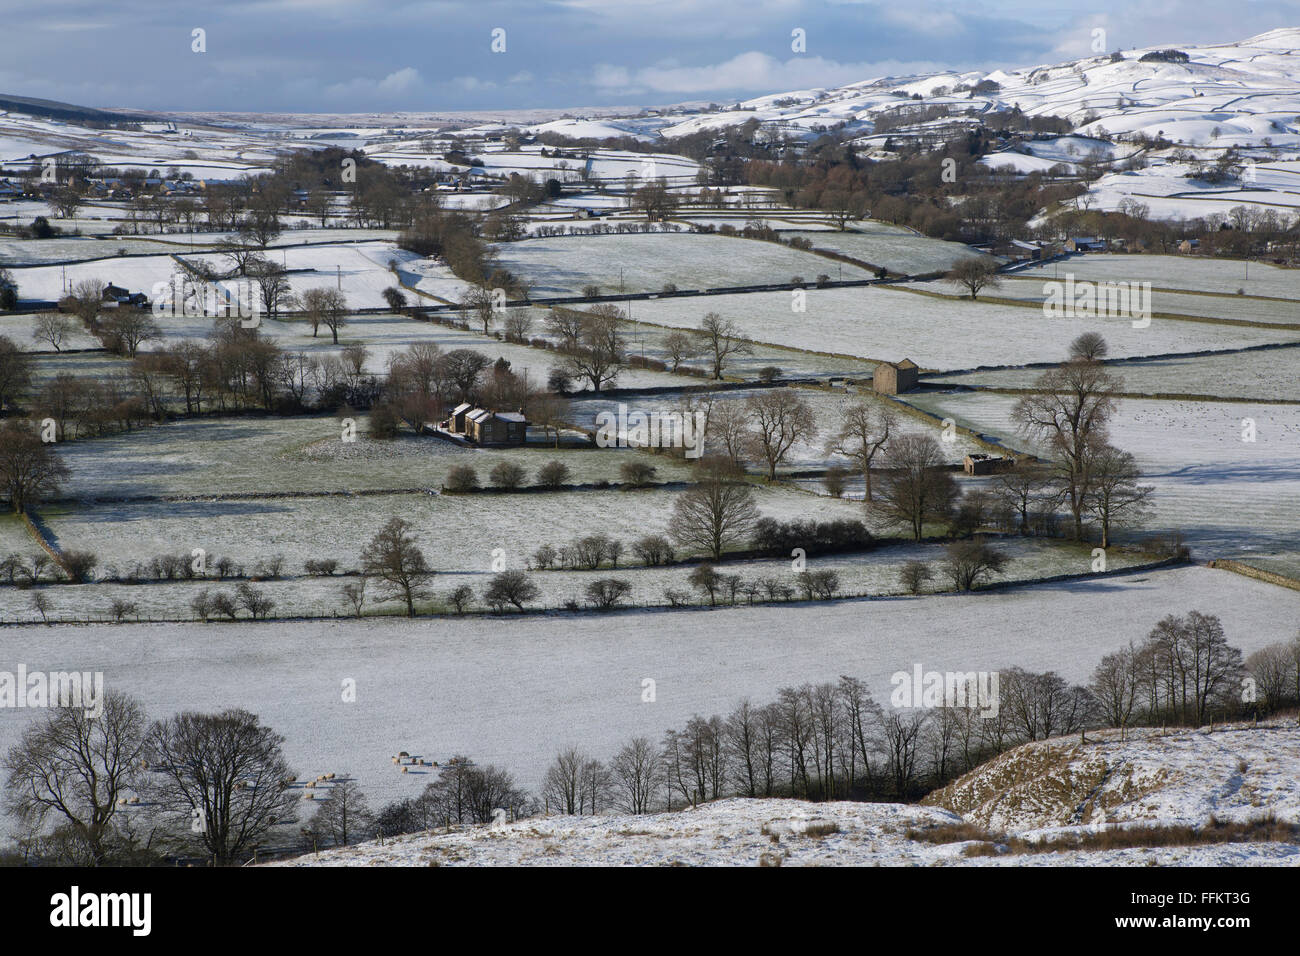 Snow dusted farmland in Upper Teesdale in County Durham, England. Dry stone walls divide the fields. Stock Photo